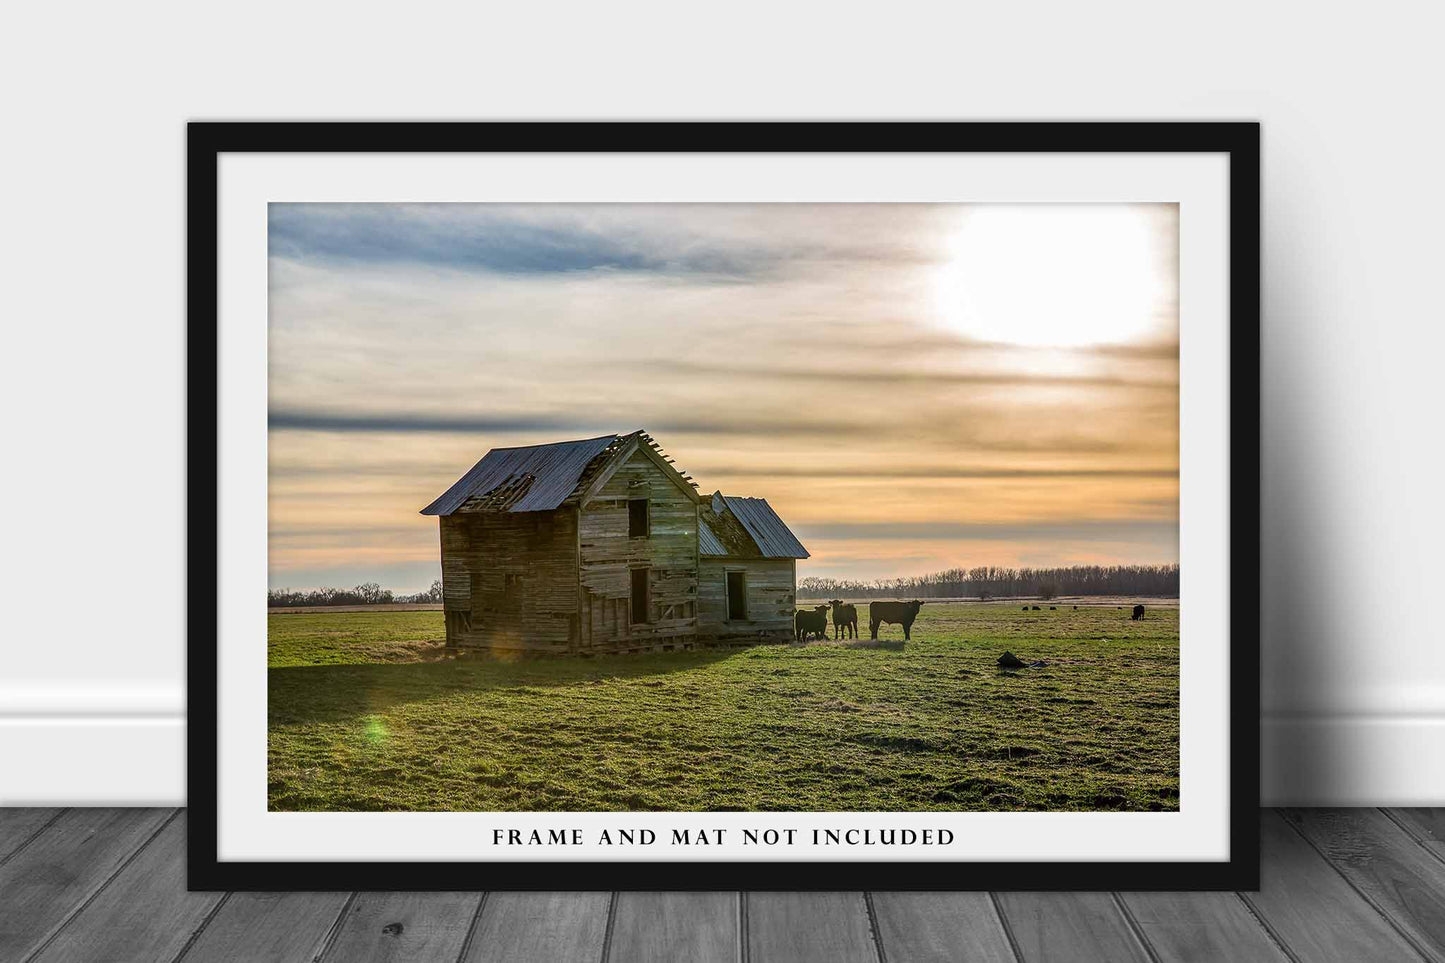 Country Photography Wall Art Print - Picture of Abandoned House in Field Guarded by Angus Cows in Oklahoma Rural Farm Decor 4x6 to 40x60